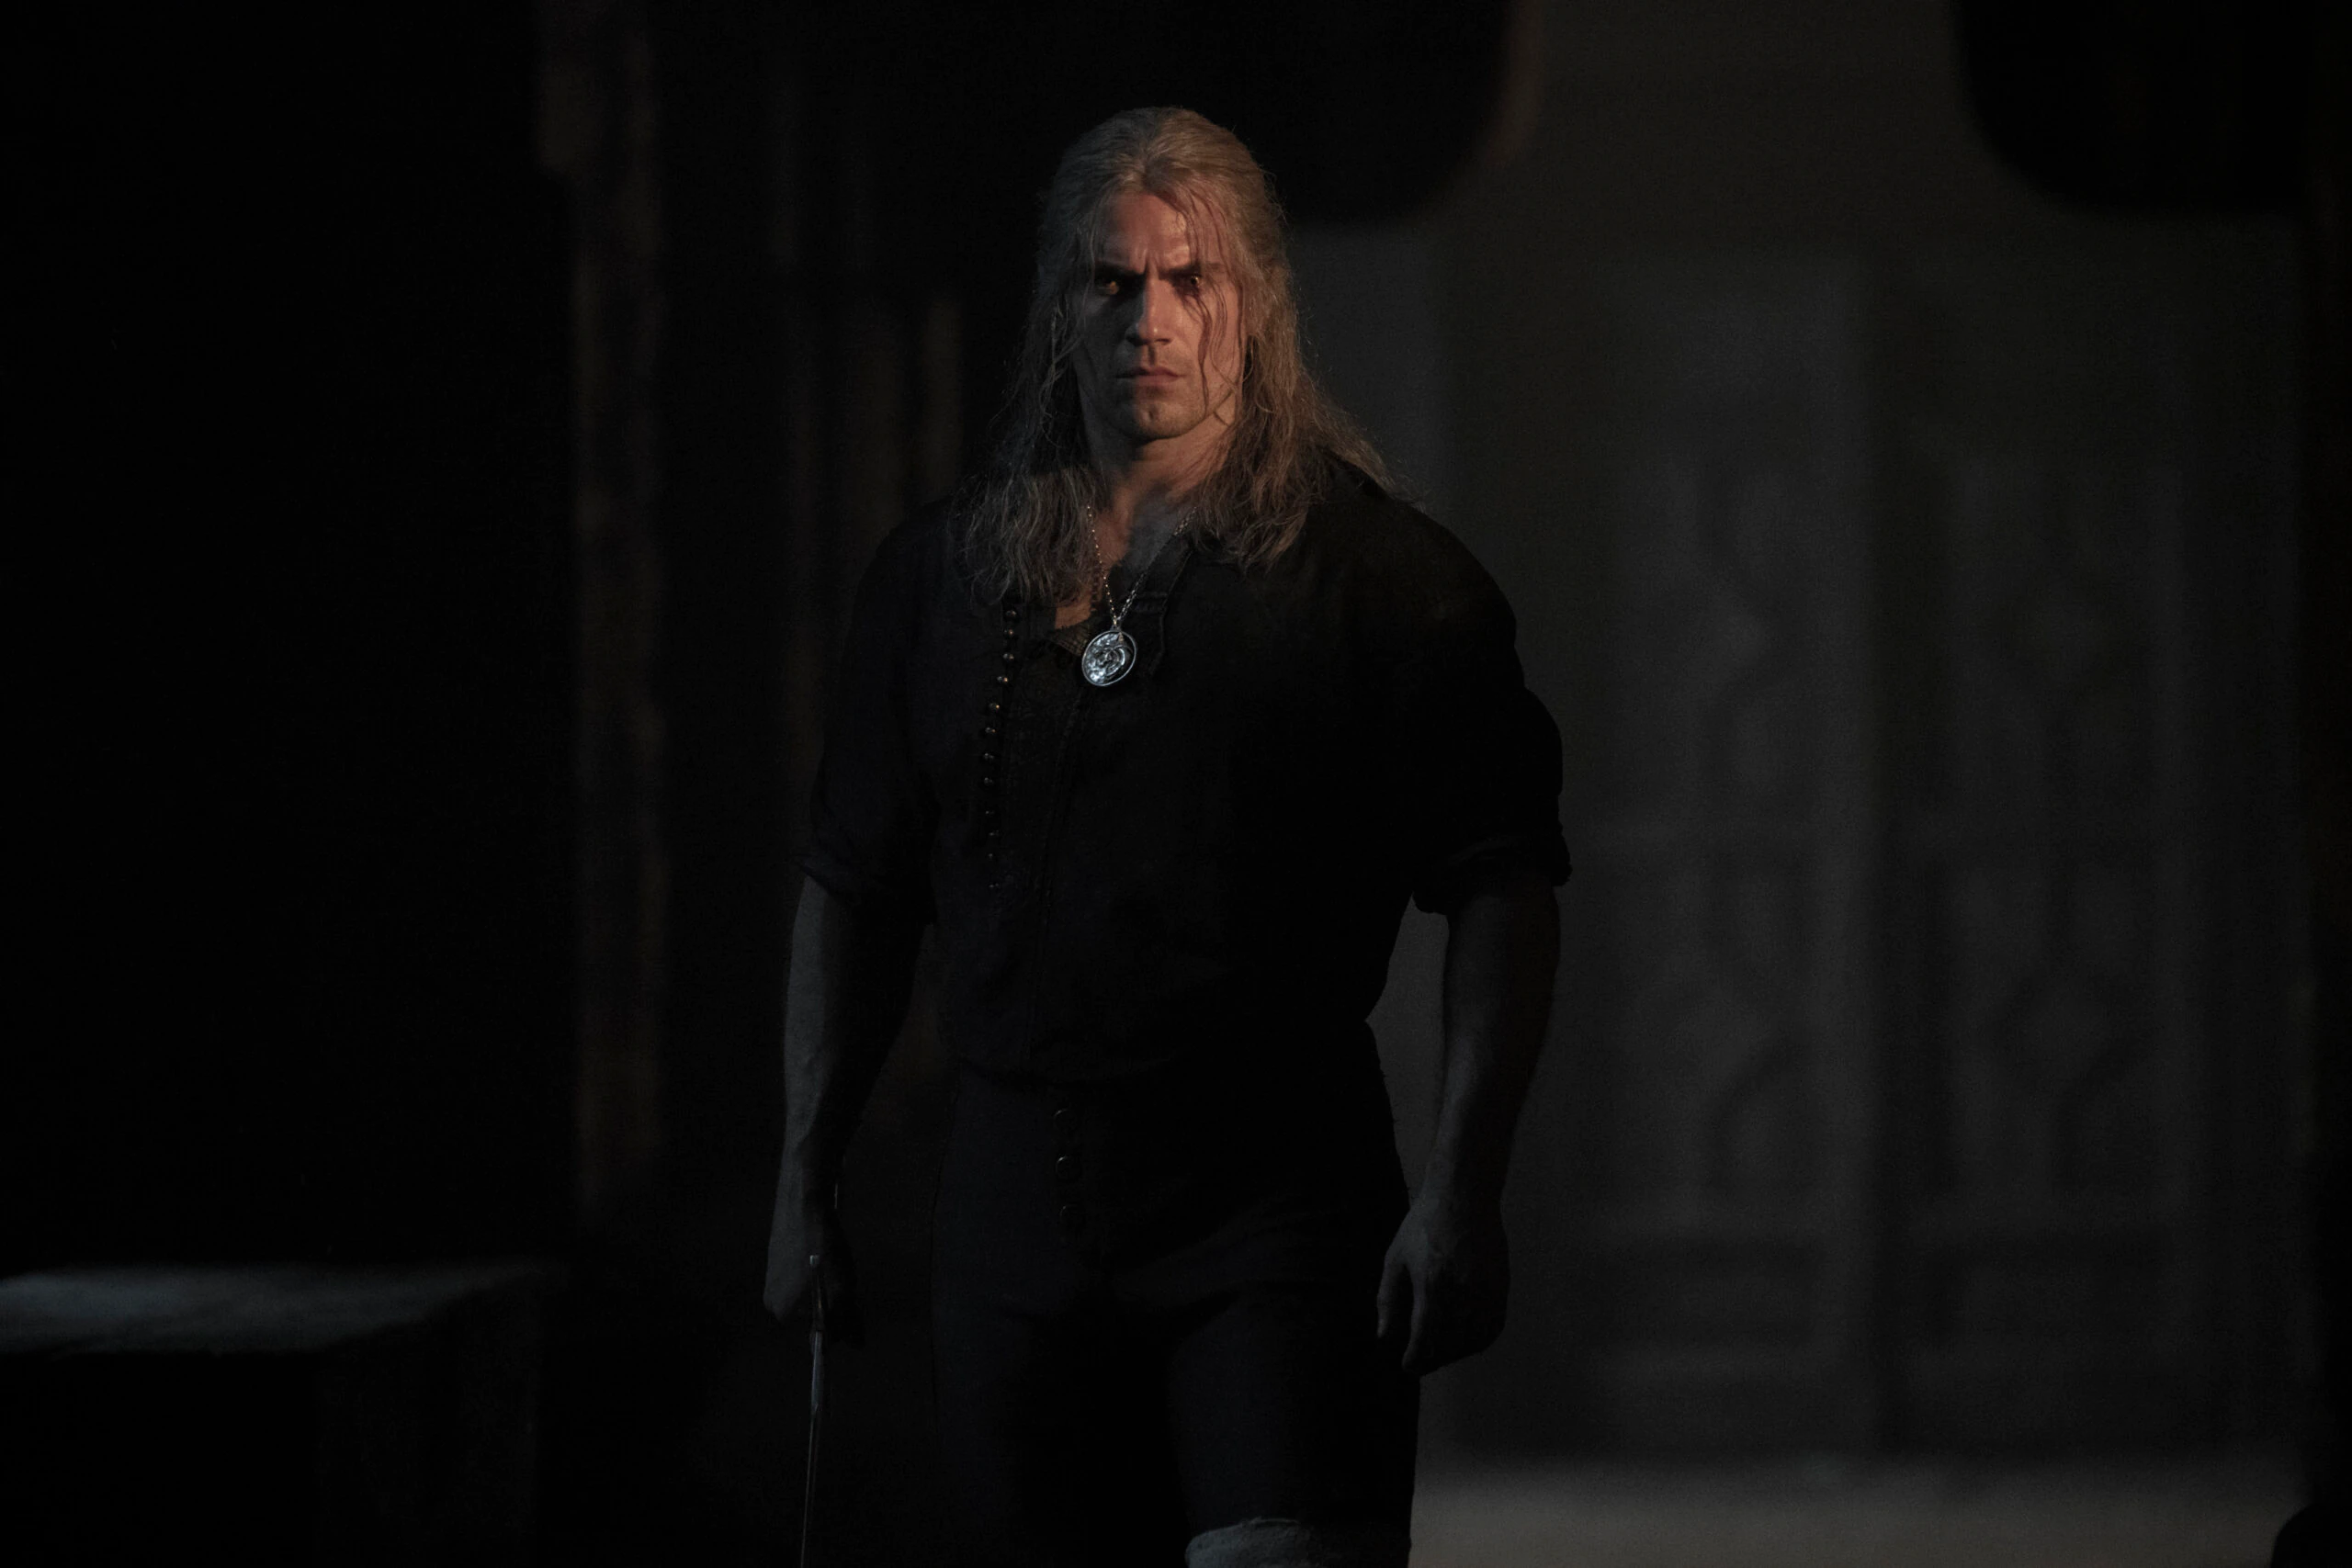 ‘The Witcher’ Season 2 Official Trailer: Henry Cavill’s Netflix Fantasy Series Gets Even More Epic